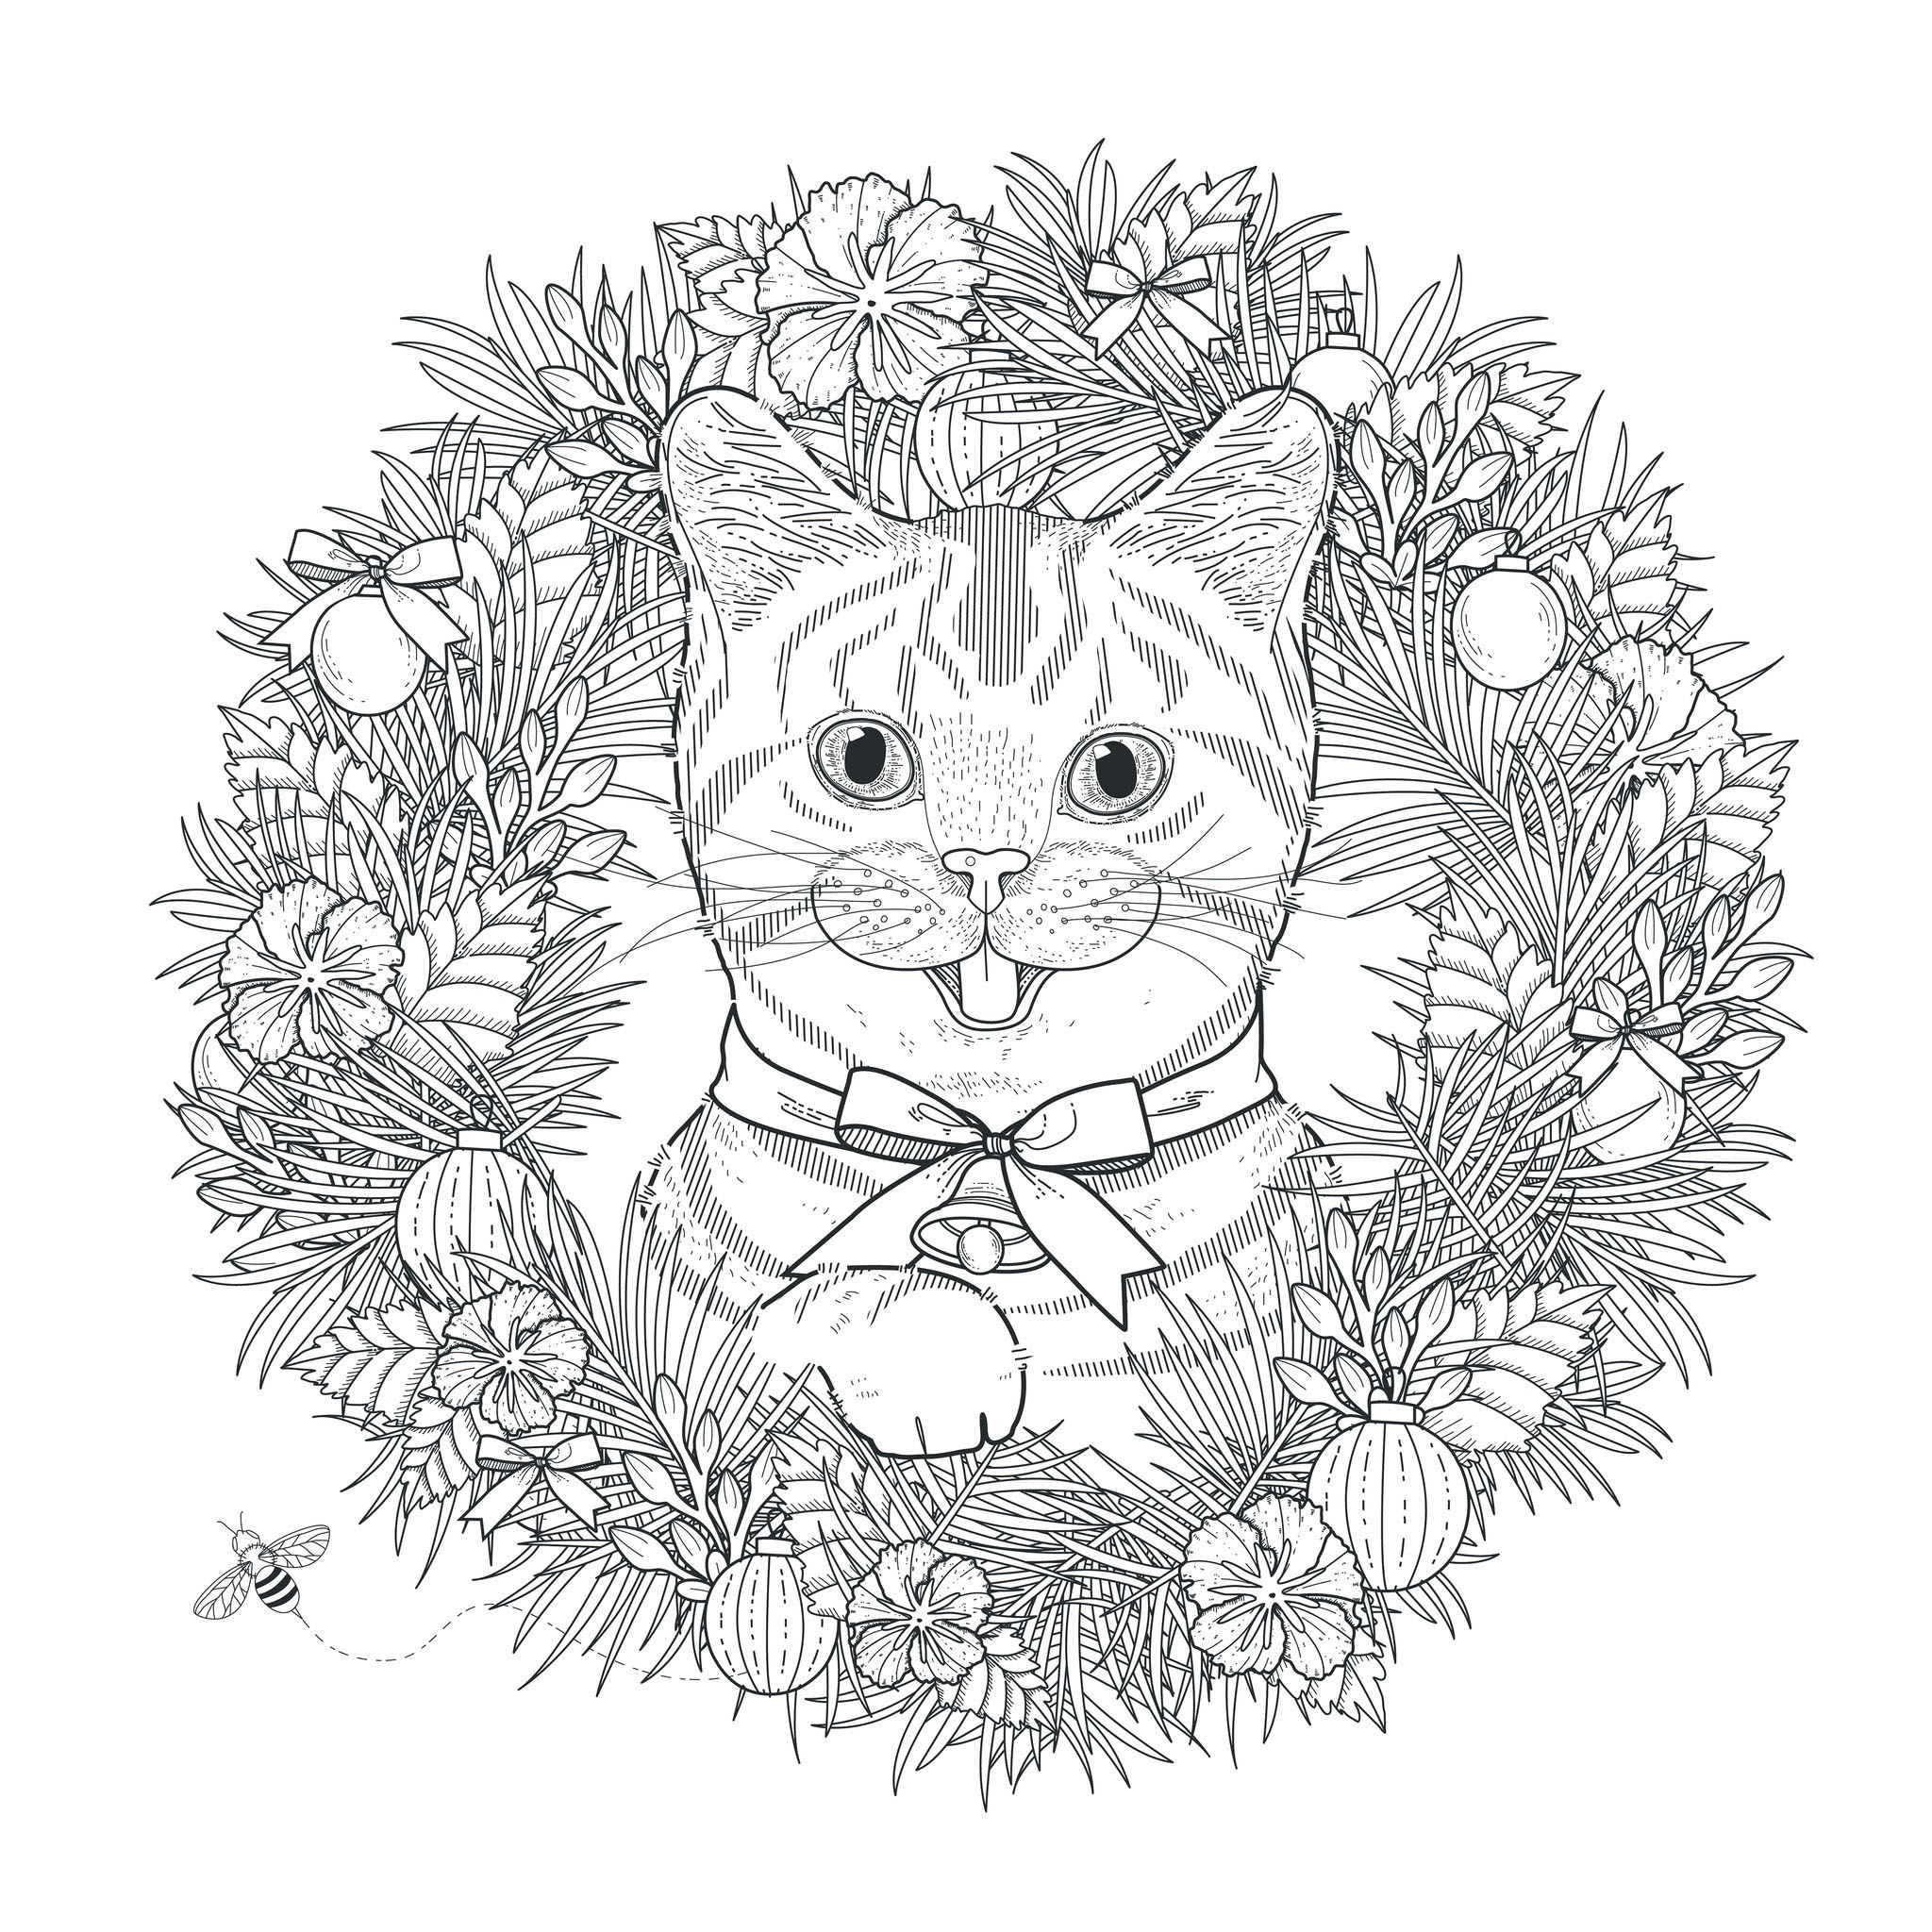 A Mandala featuring a funny cat, for those who prefer to color concrete and living elements. Do whatever it takes to get rid of any distractions that may interfere with your coloring.